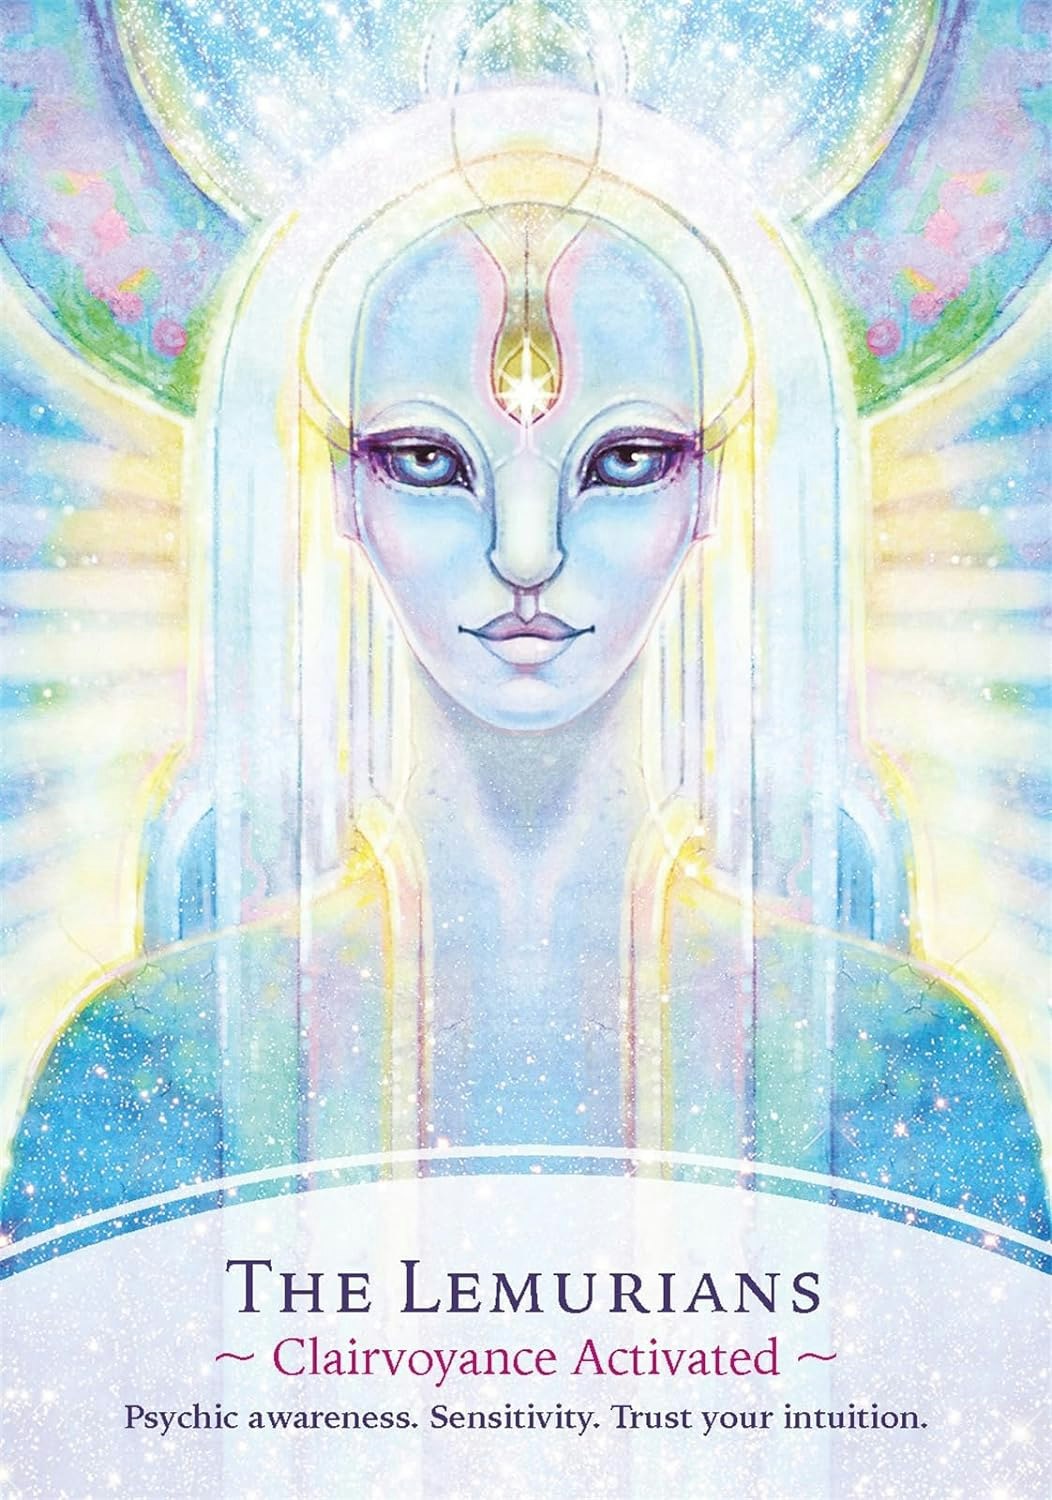 The Divine Masters Oracle